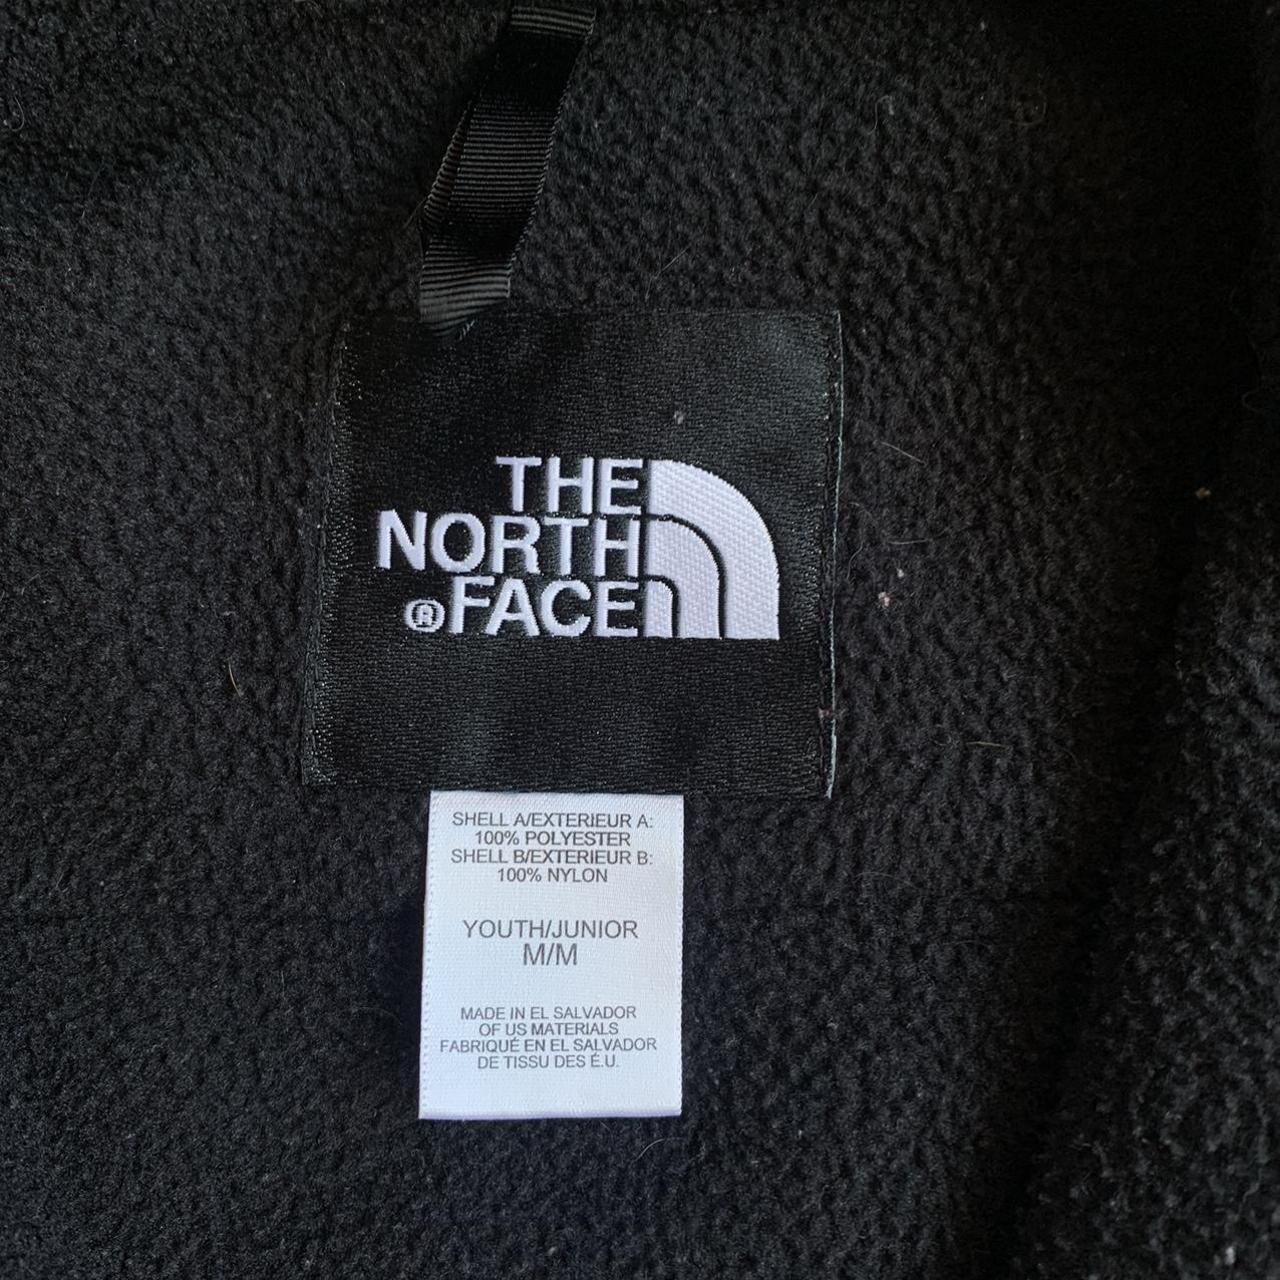 The North Face Women's Black and White Jacket (3)